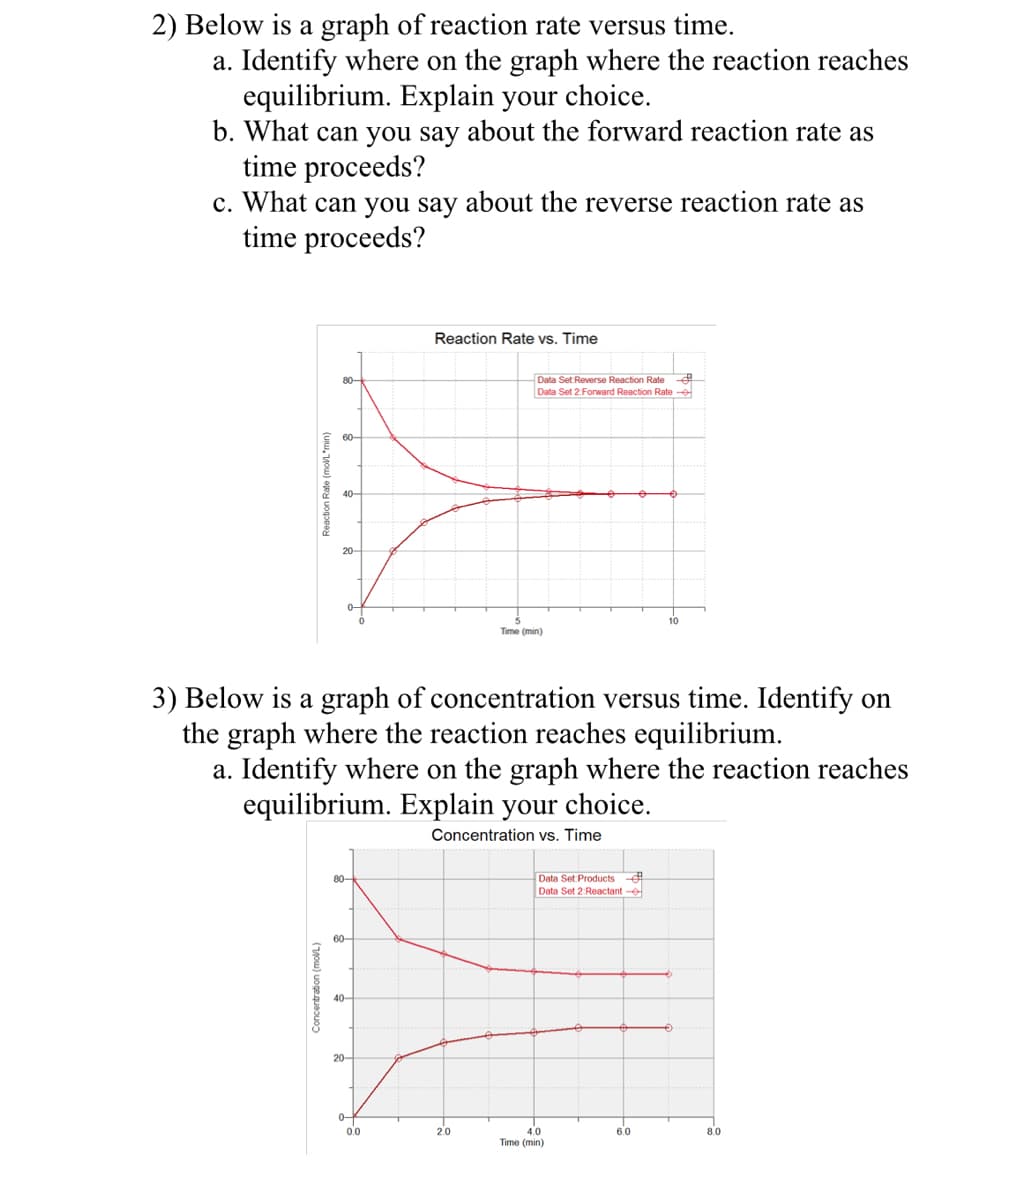 2) Below is a graph of reaction rate versus time.
a. Identify where on the graph where the reaction reaches
equilibrium. Explain your choice.
b. What can you say about the forward reaction rate as
time proceeds?
c. What can you say about the reverse reaction rate as
time proceeds?
Reaction Rate vs. Time
Data Set Reverse Reaction Rate -
Data Set 2 Forward Reaction Rate e
80-
60-
20-
10
Time (min)
3) Below is a graph of concentration versus time. Identify on
the graph where the reaction reaches equilibrium.
a. Identify where on the graph where the reaction reaches
equilibrium. Explain your choice.
Concentration vs. Time
Data Set. Products -
Data Set 2 Reactant -e
80-
60-
40-
20-
0-
0.0
2.0
4.0
6.0
8.0
Time (min)
Reaction Rate
